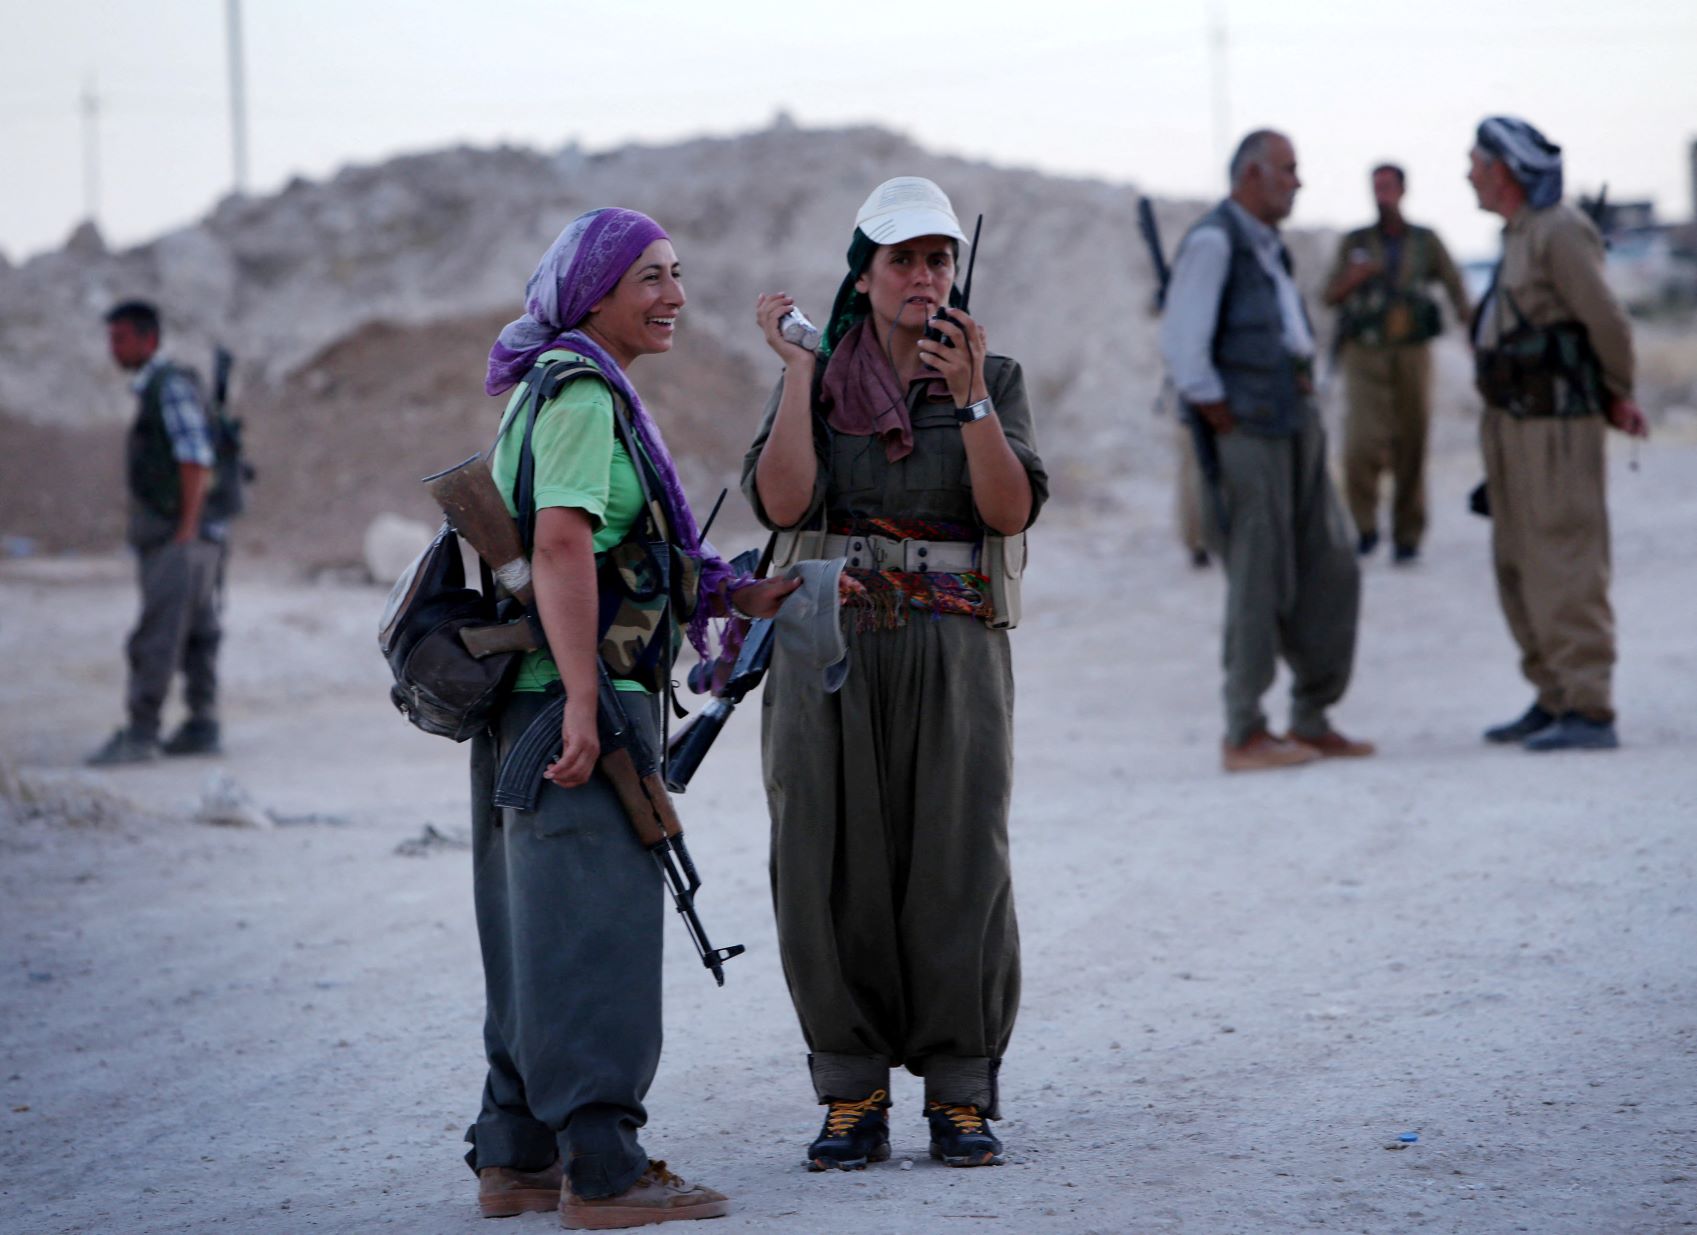 Female members of the Kurdistan Workers' Party (PKK) take position on the front line in Makhmour against the Islamic State group on August 9, 2014 (AFP)